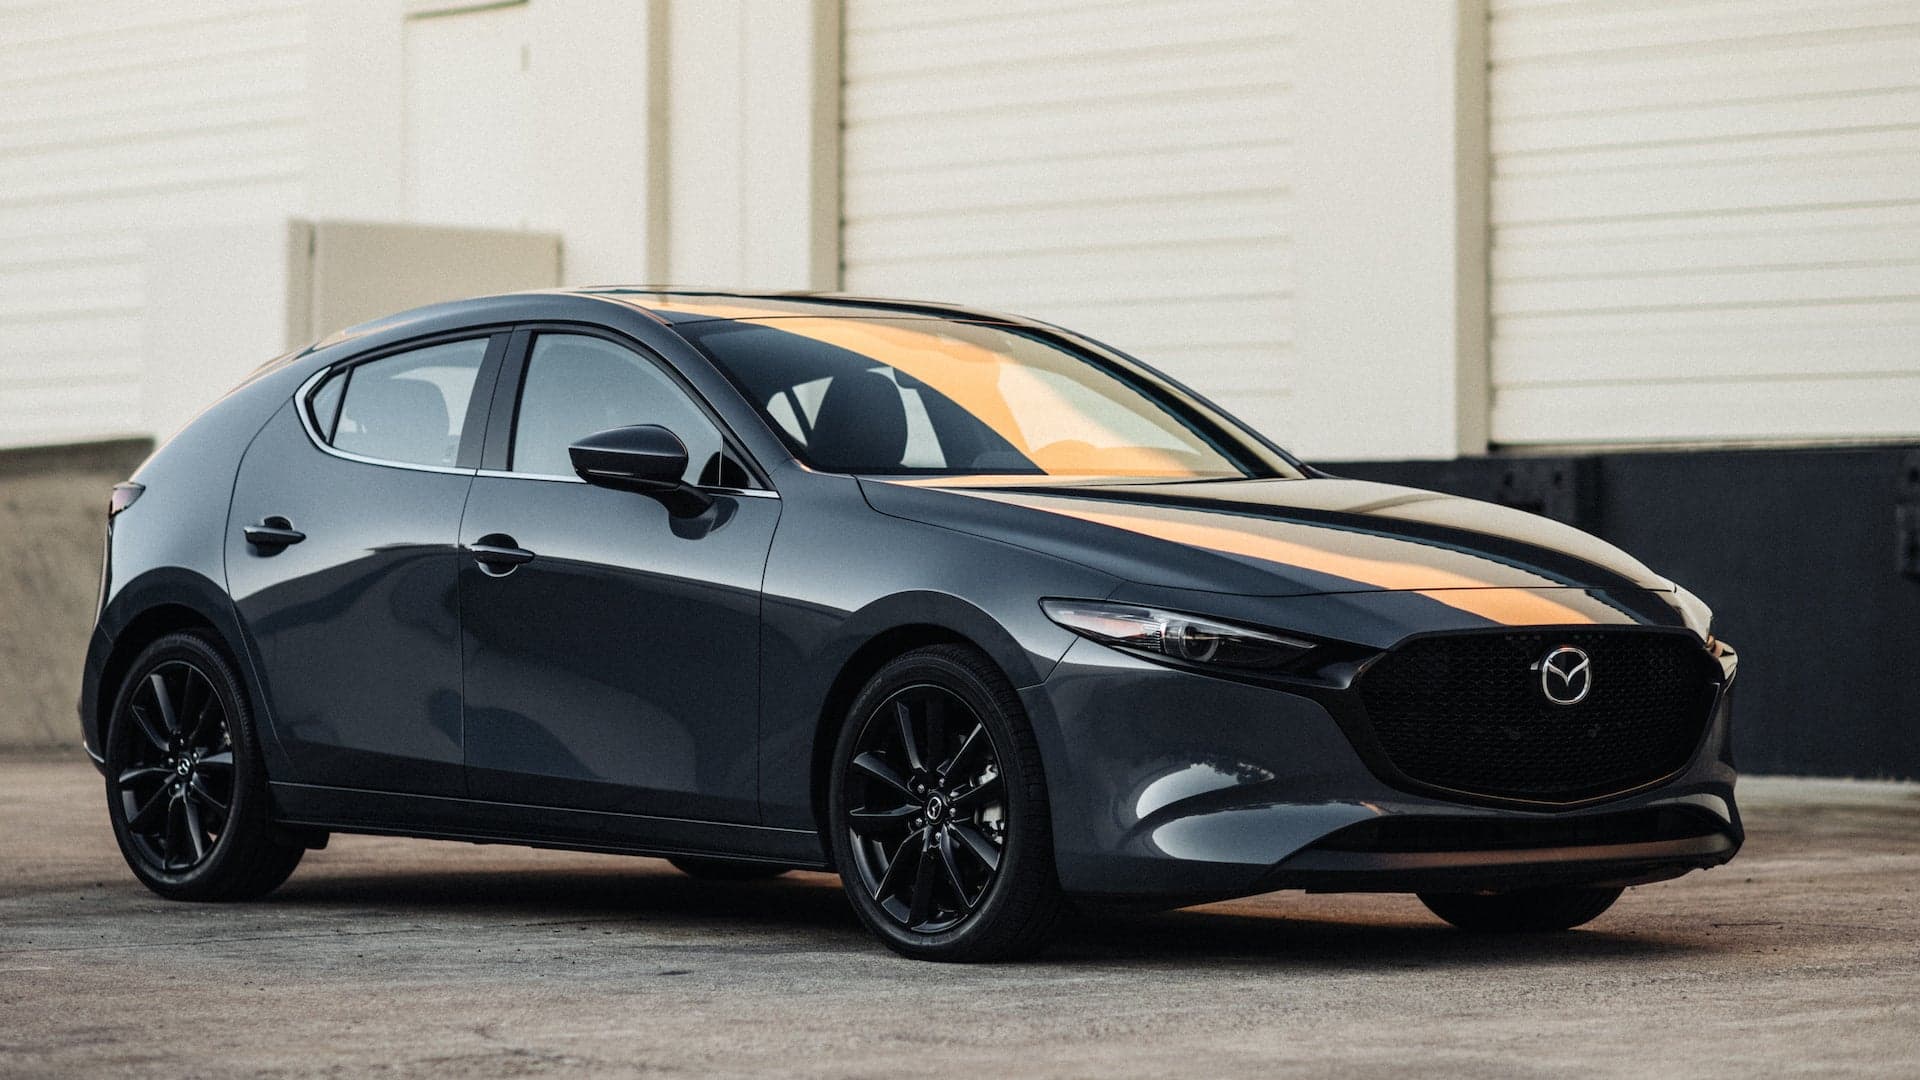 2021 Mazda3 May Get Turbo Power, AWD, Performance Pack: Report